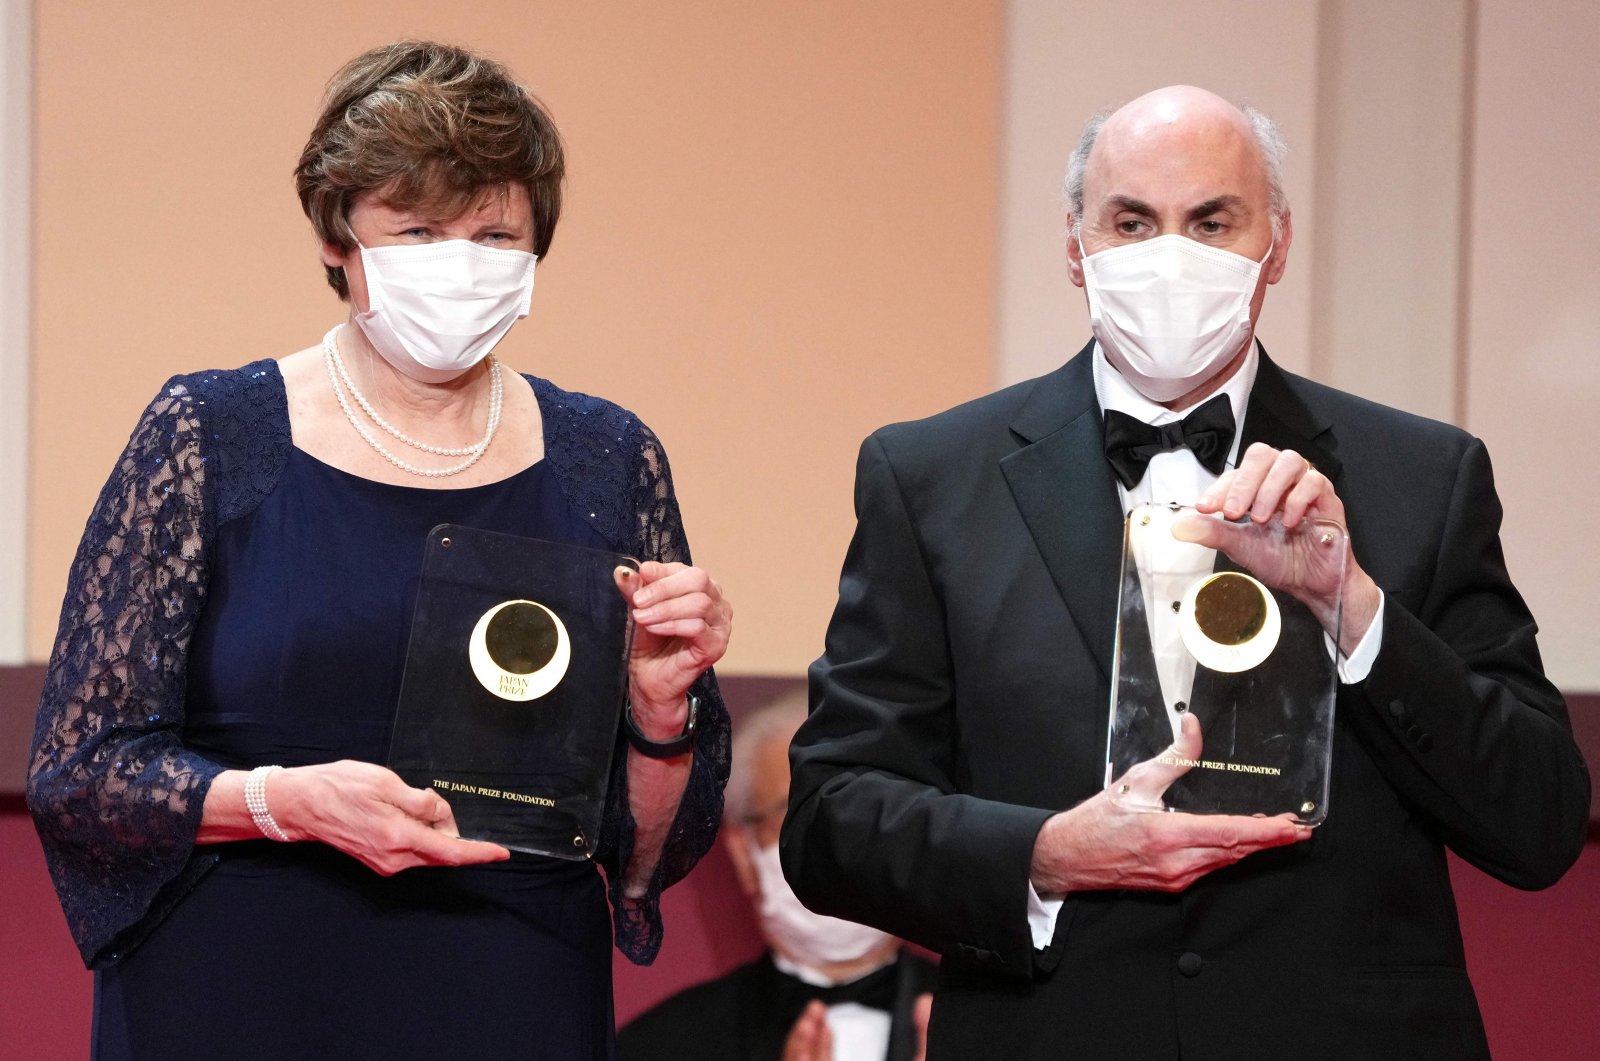 Japan Prize 2022 Laureates Hungarian-American biochemist Katalin Kariko (L) and American physician-scientist Drew Weissman pose with their trophy during the Japan Prize presentation ceremony in Tokyo on April 13, 2022. (AFP Photo)